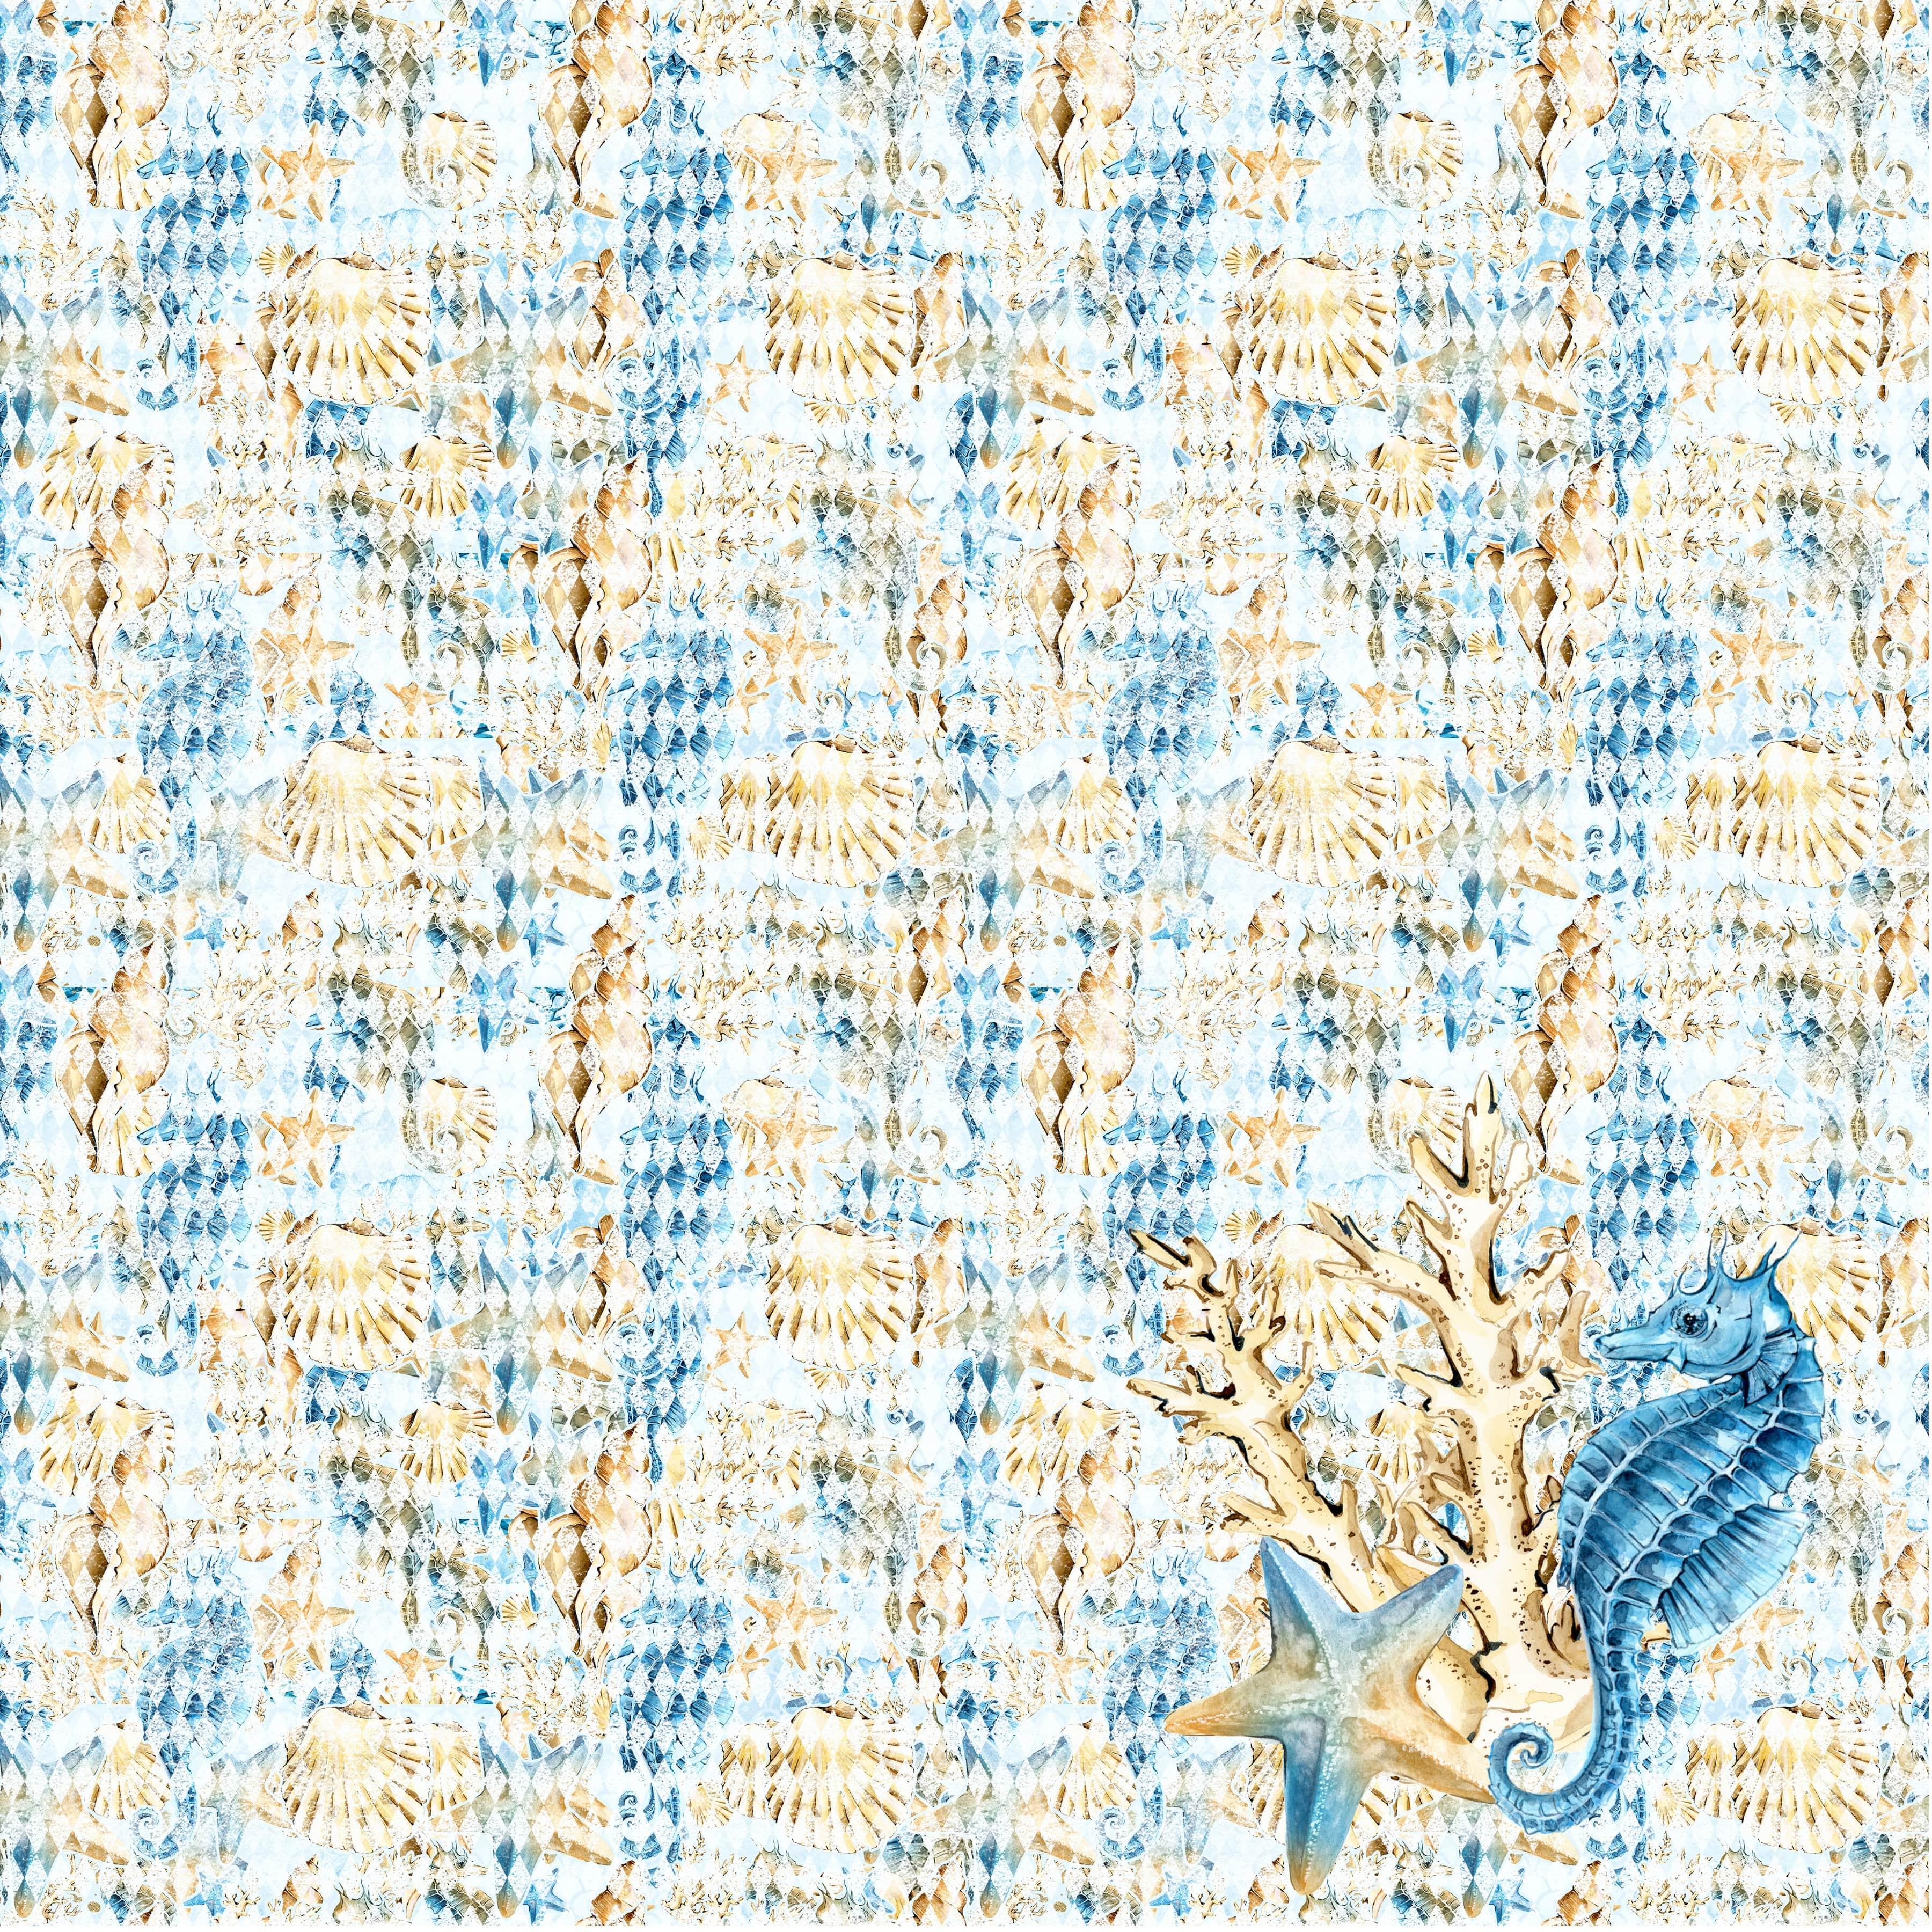 Frou Frou's Sun & Sand Collection Ocean Life 12 x 12 Double-Sided Scrapbook Paper by SSC Designs - Scrapbook Supply Companies